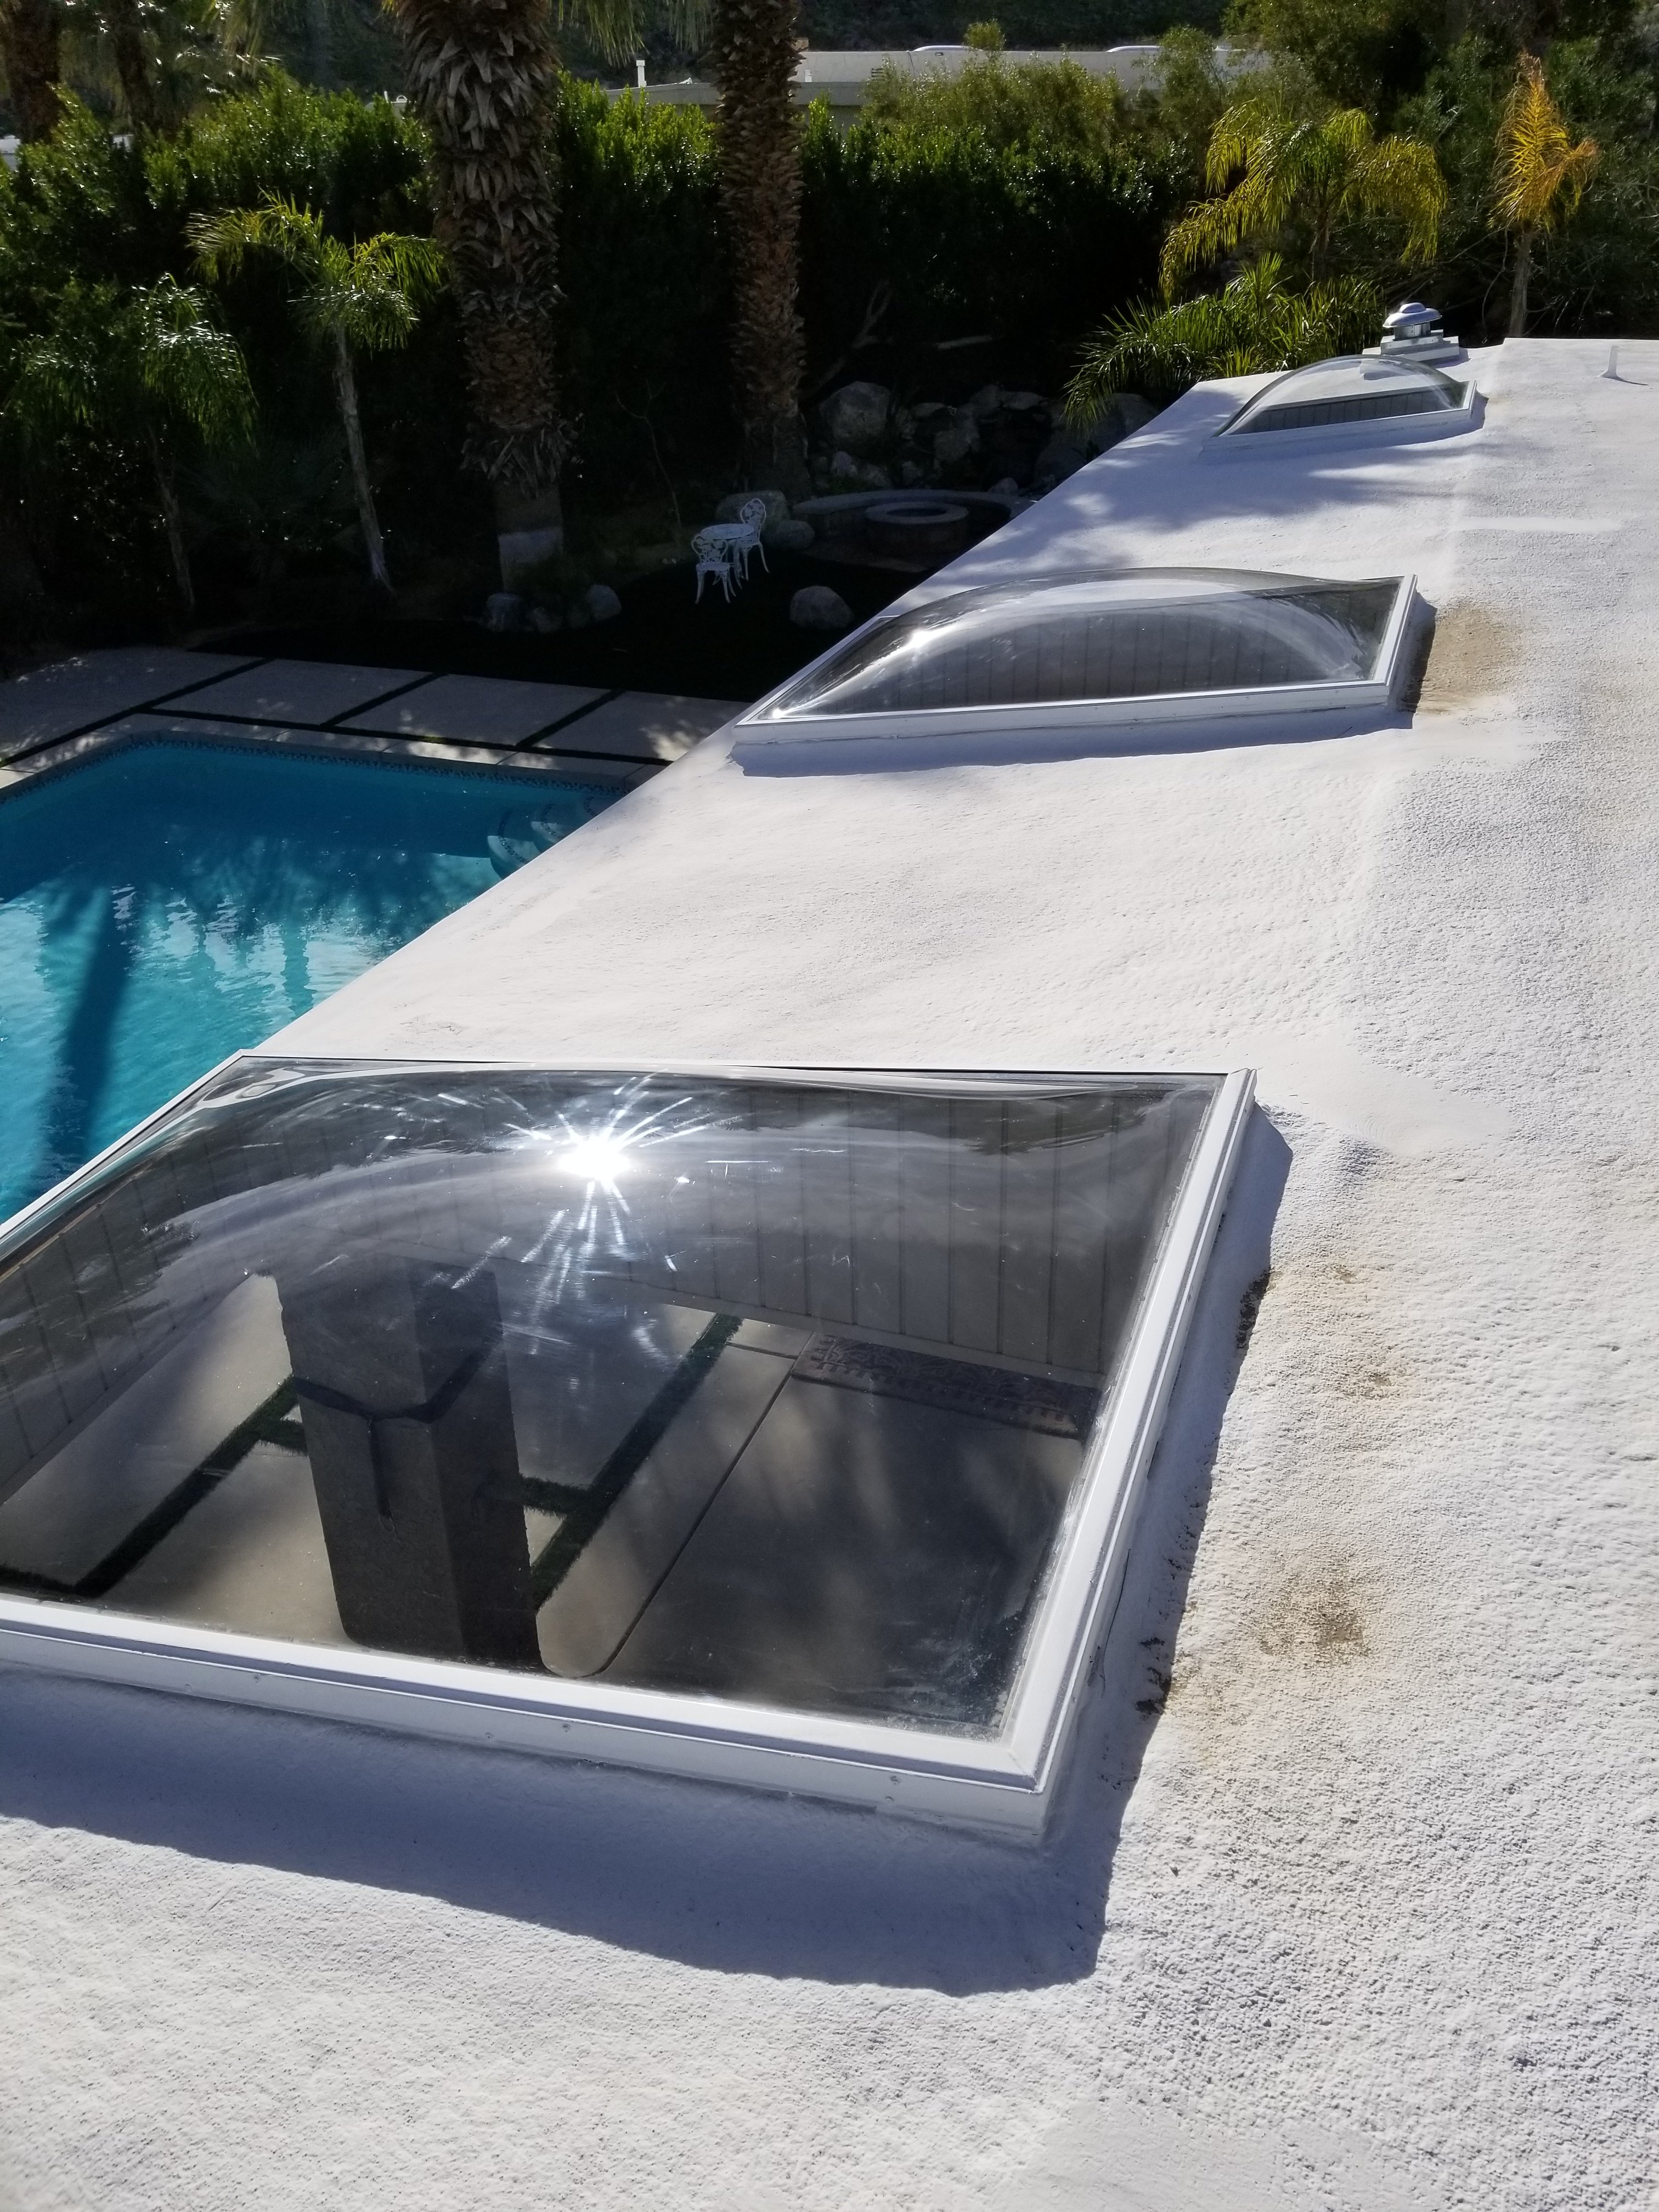 Polycarbonate skylights recently cleaned on home in Palm Springs, California 